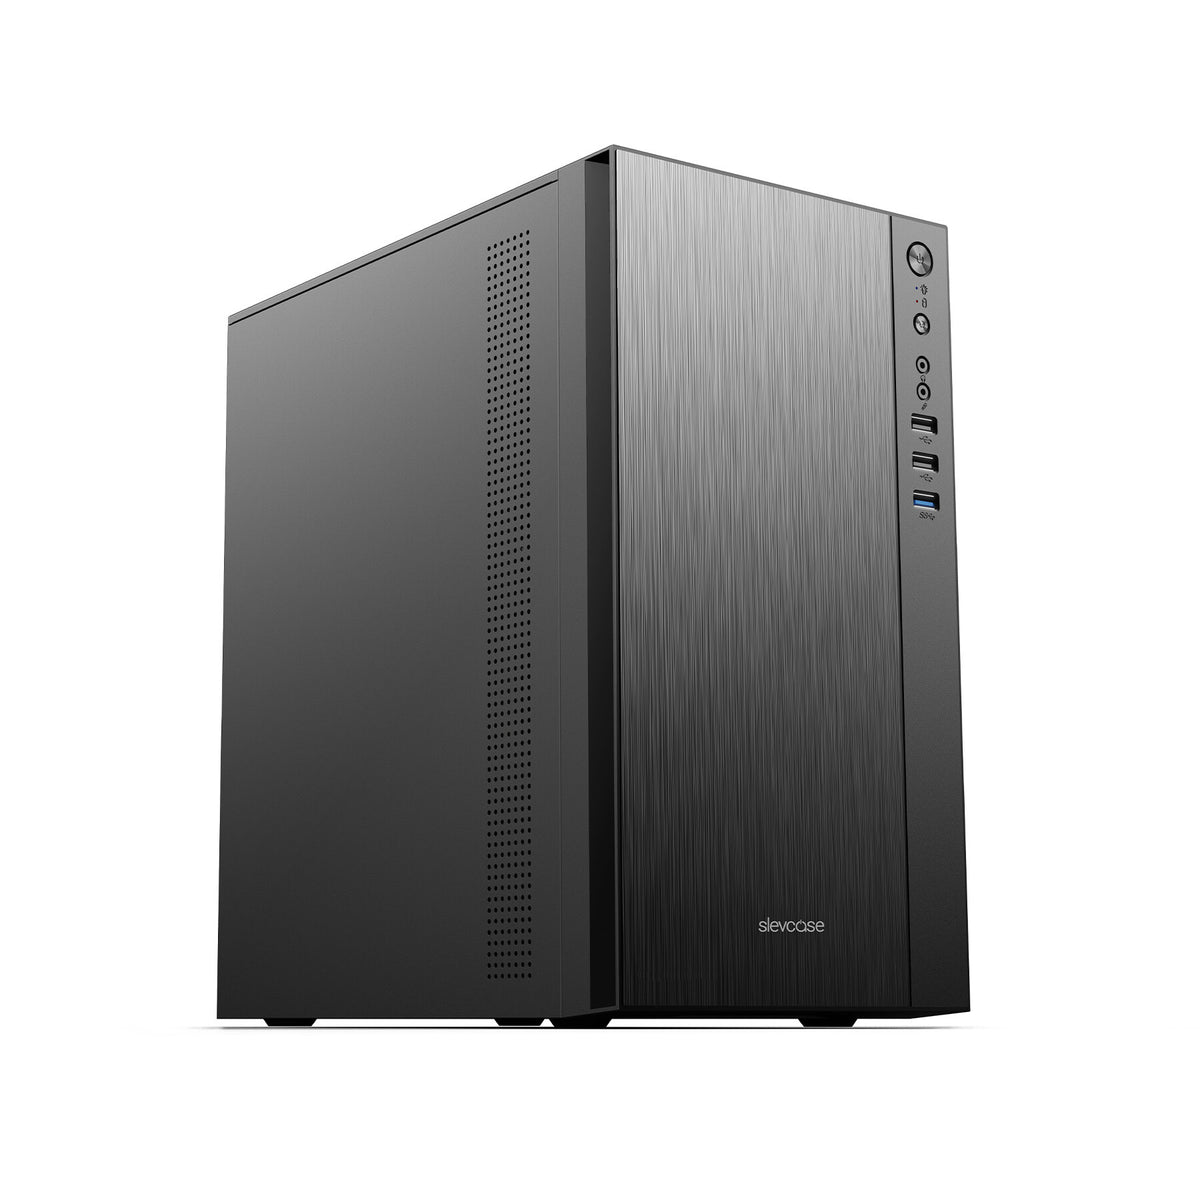 Slevcase A-Touch with SE380 PSU (Black)